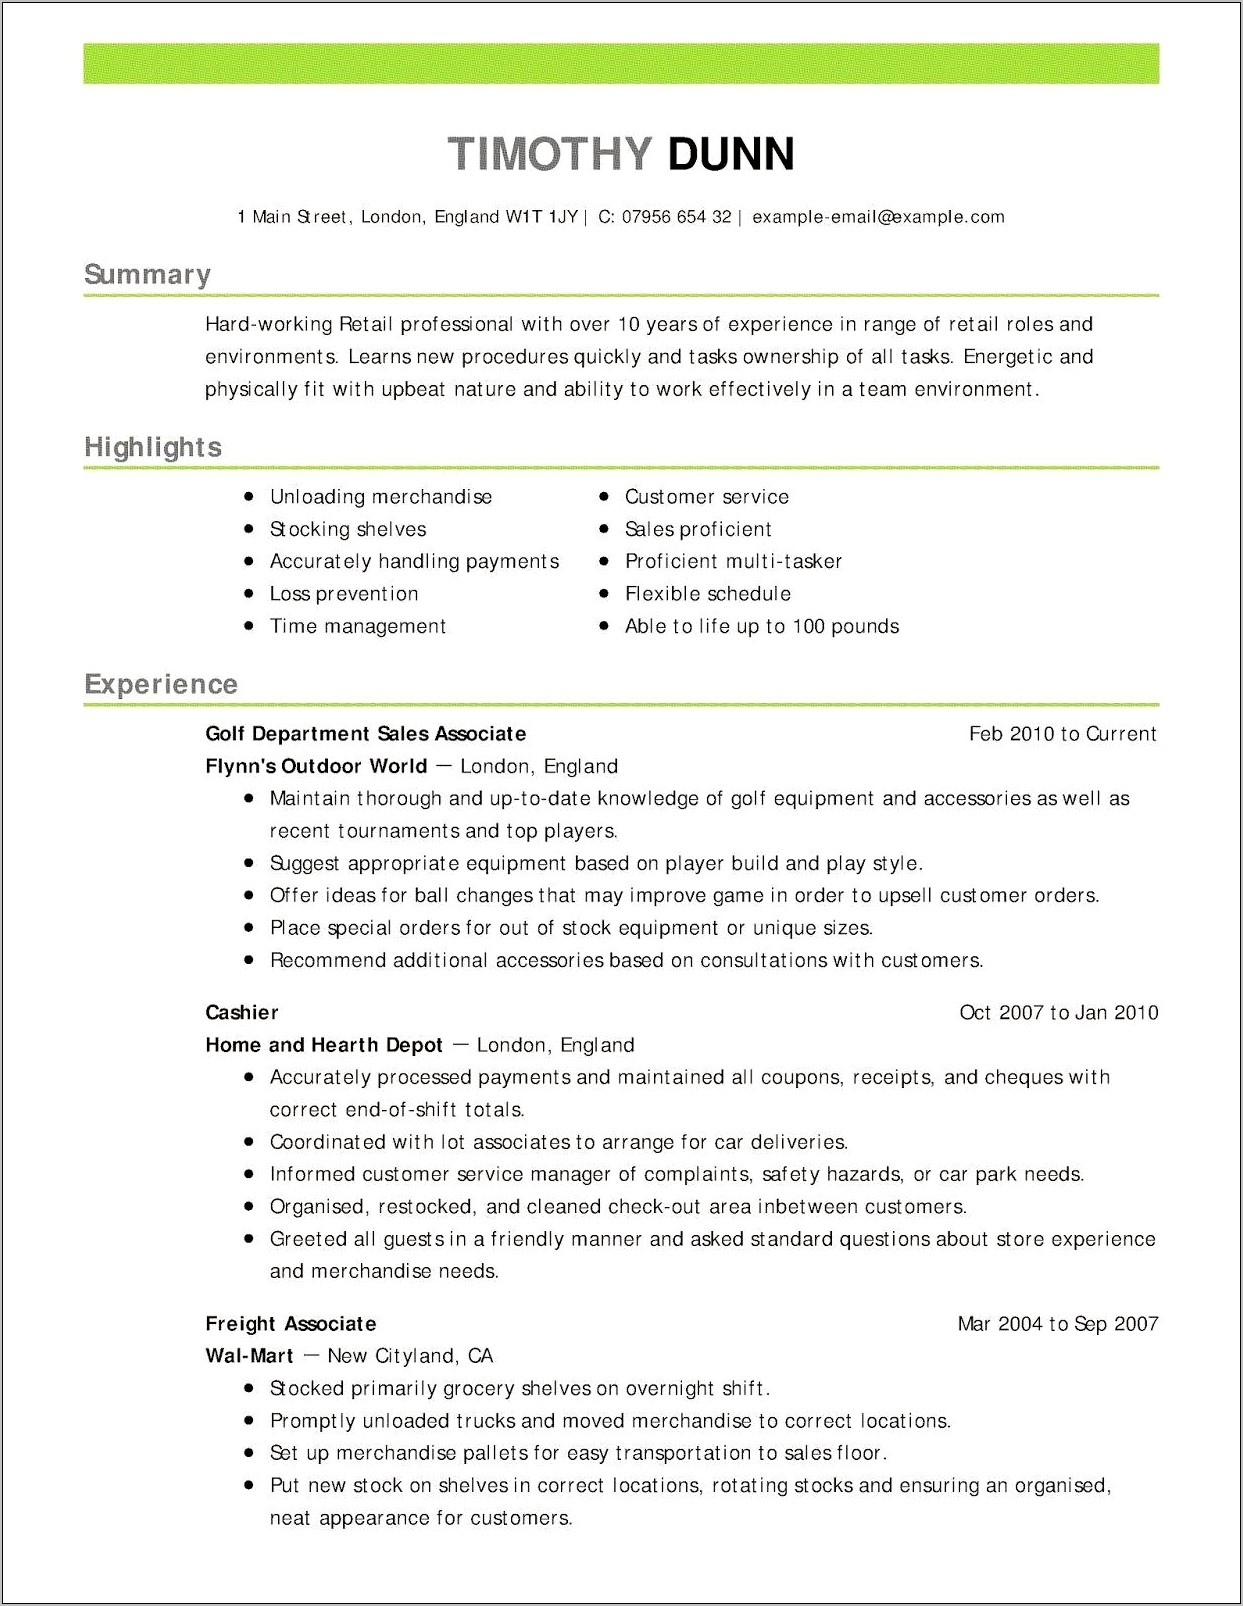 Resume Verbage For Working In A Gun Store